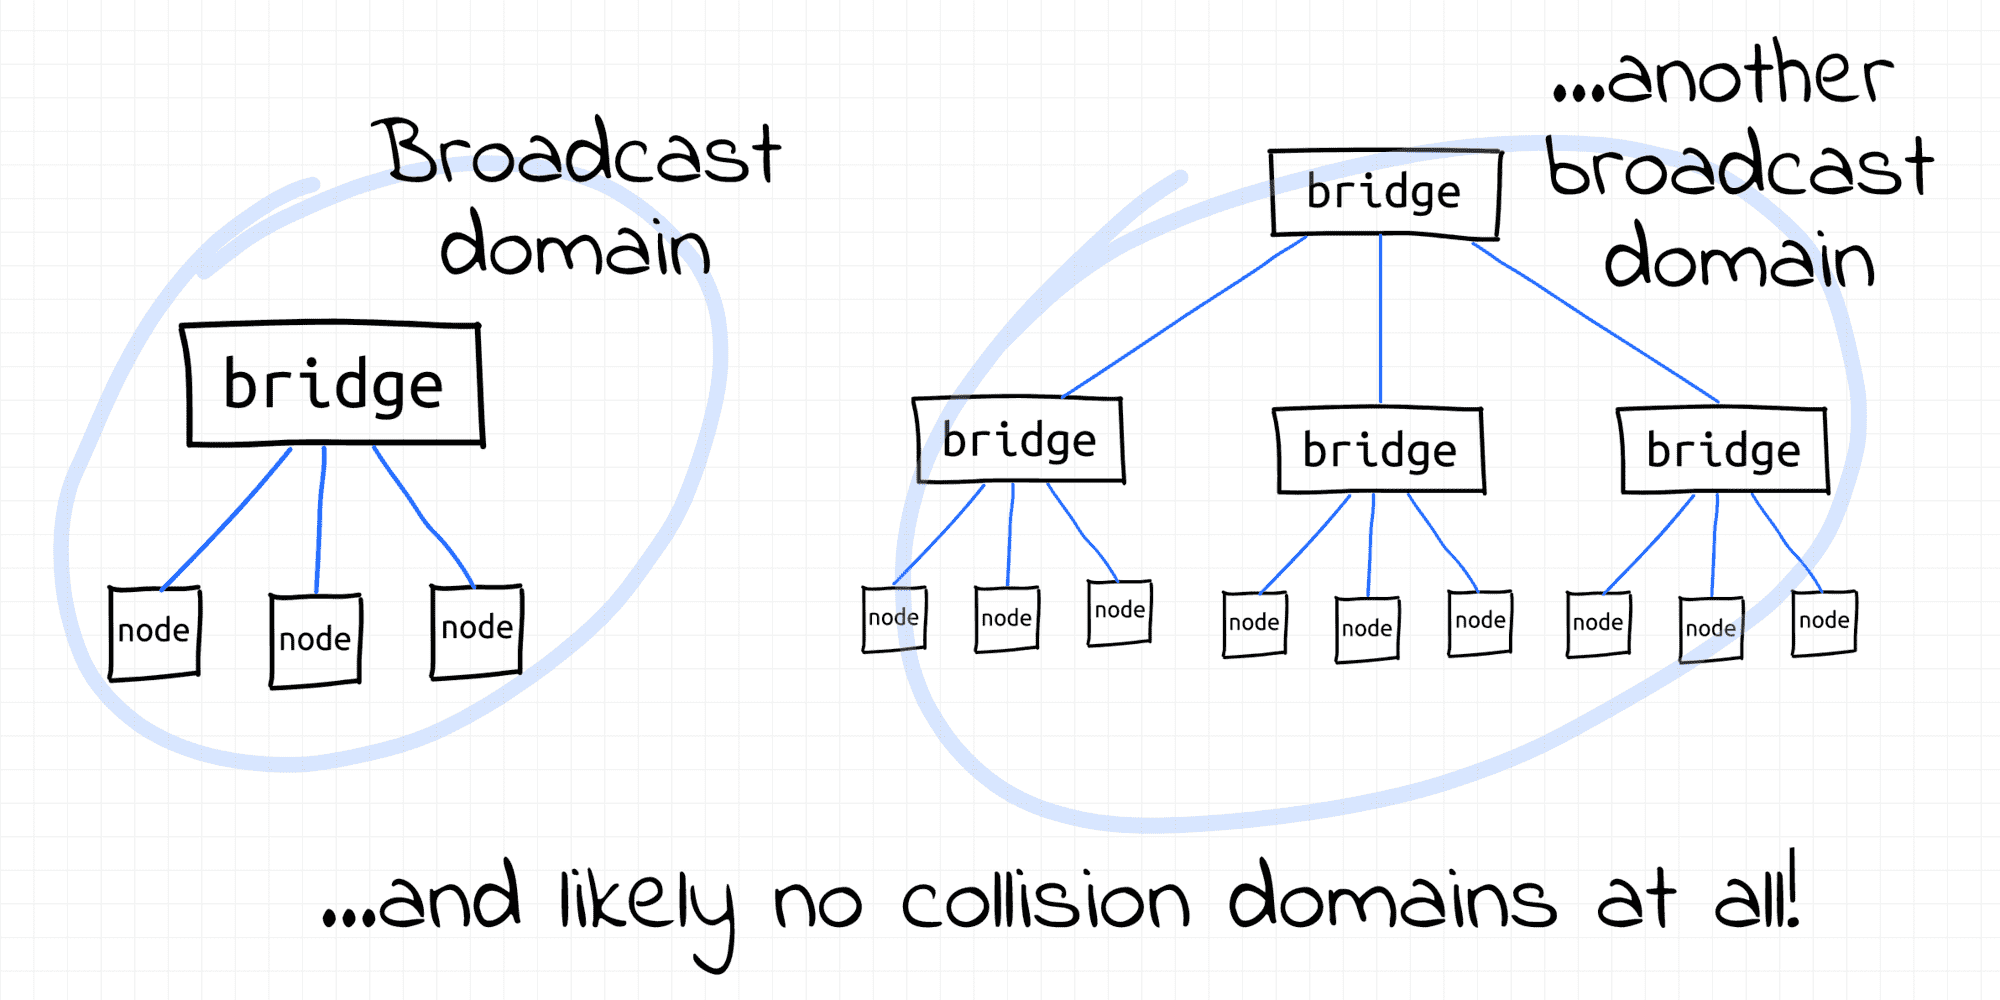 Broadcast domain examples